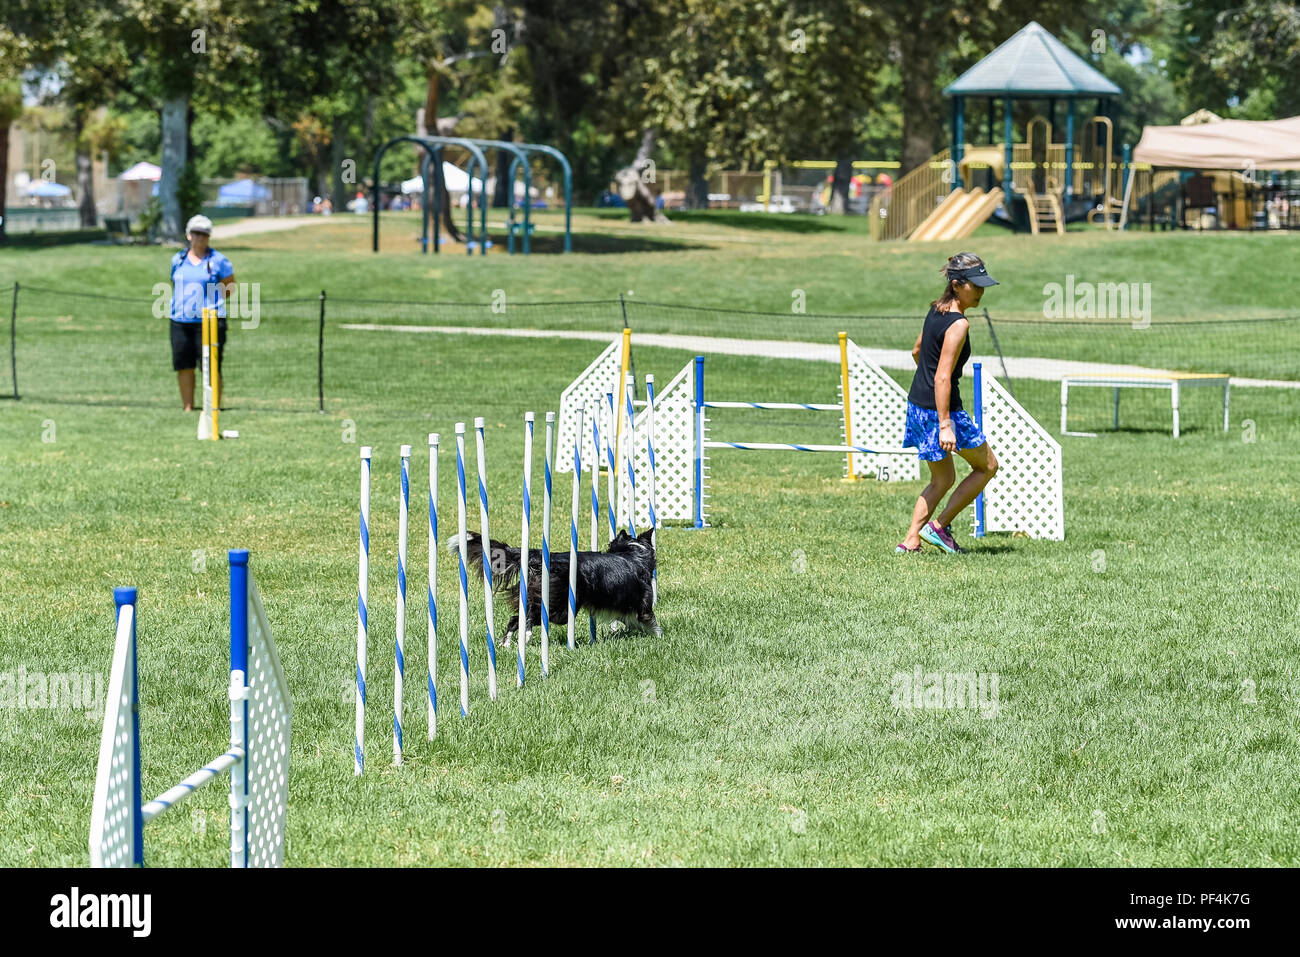 California, USA. 18 August 2018.  Keeshond Club of Southern California dog agility trails dog show at Mile Square Park in Fountain Valley, CA on August 18, 2018. Credit: Benjamin Ginsberg Credit: Benjamin Ginsberg/Alamy Live News Credit: Benjamin Ginsberg/Alamy Live News Stock Photo